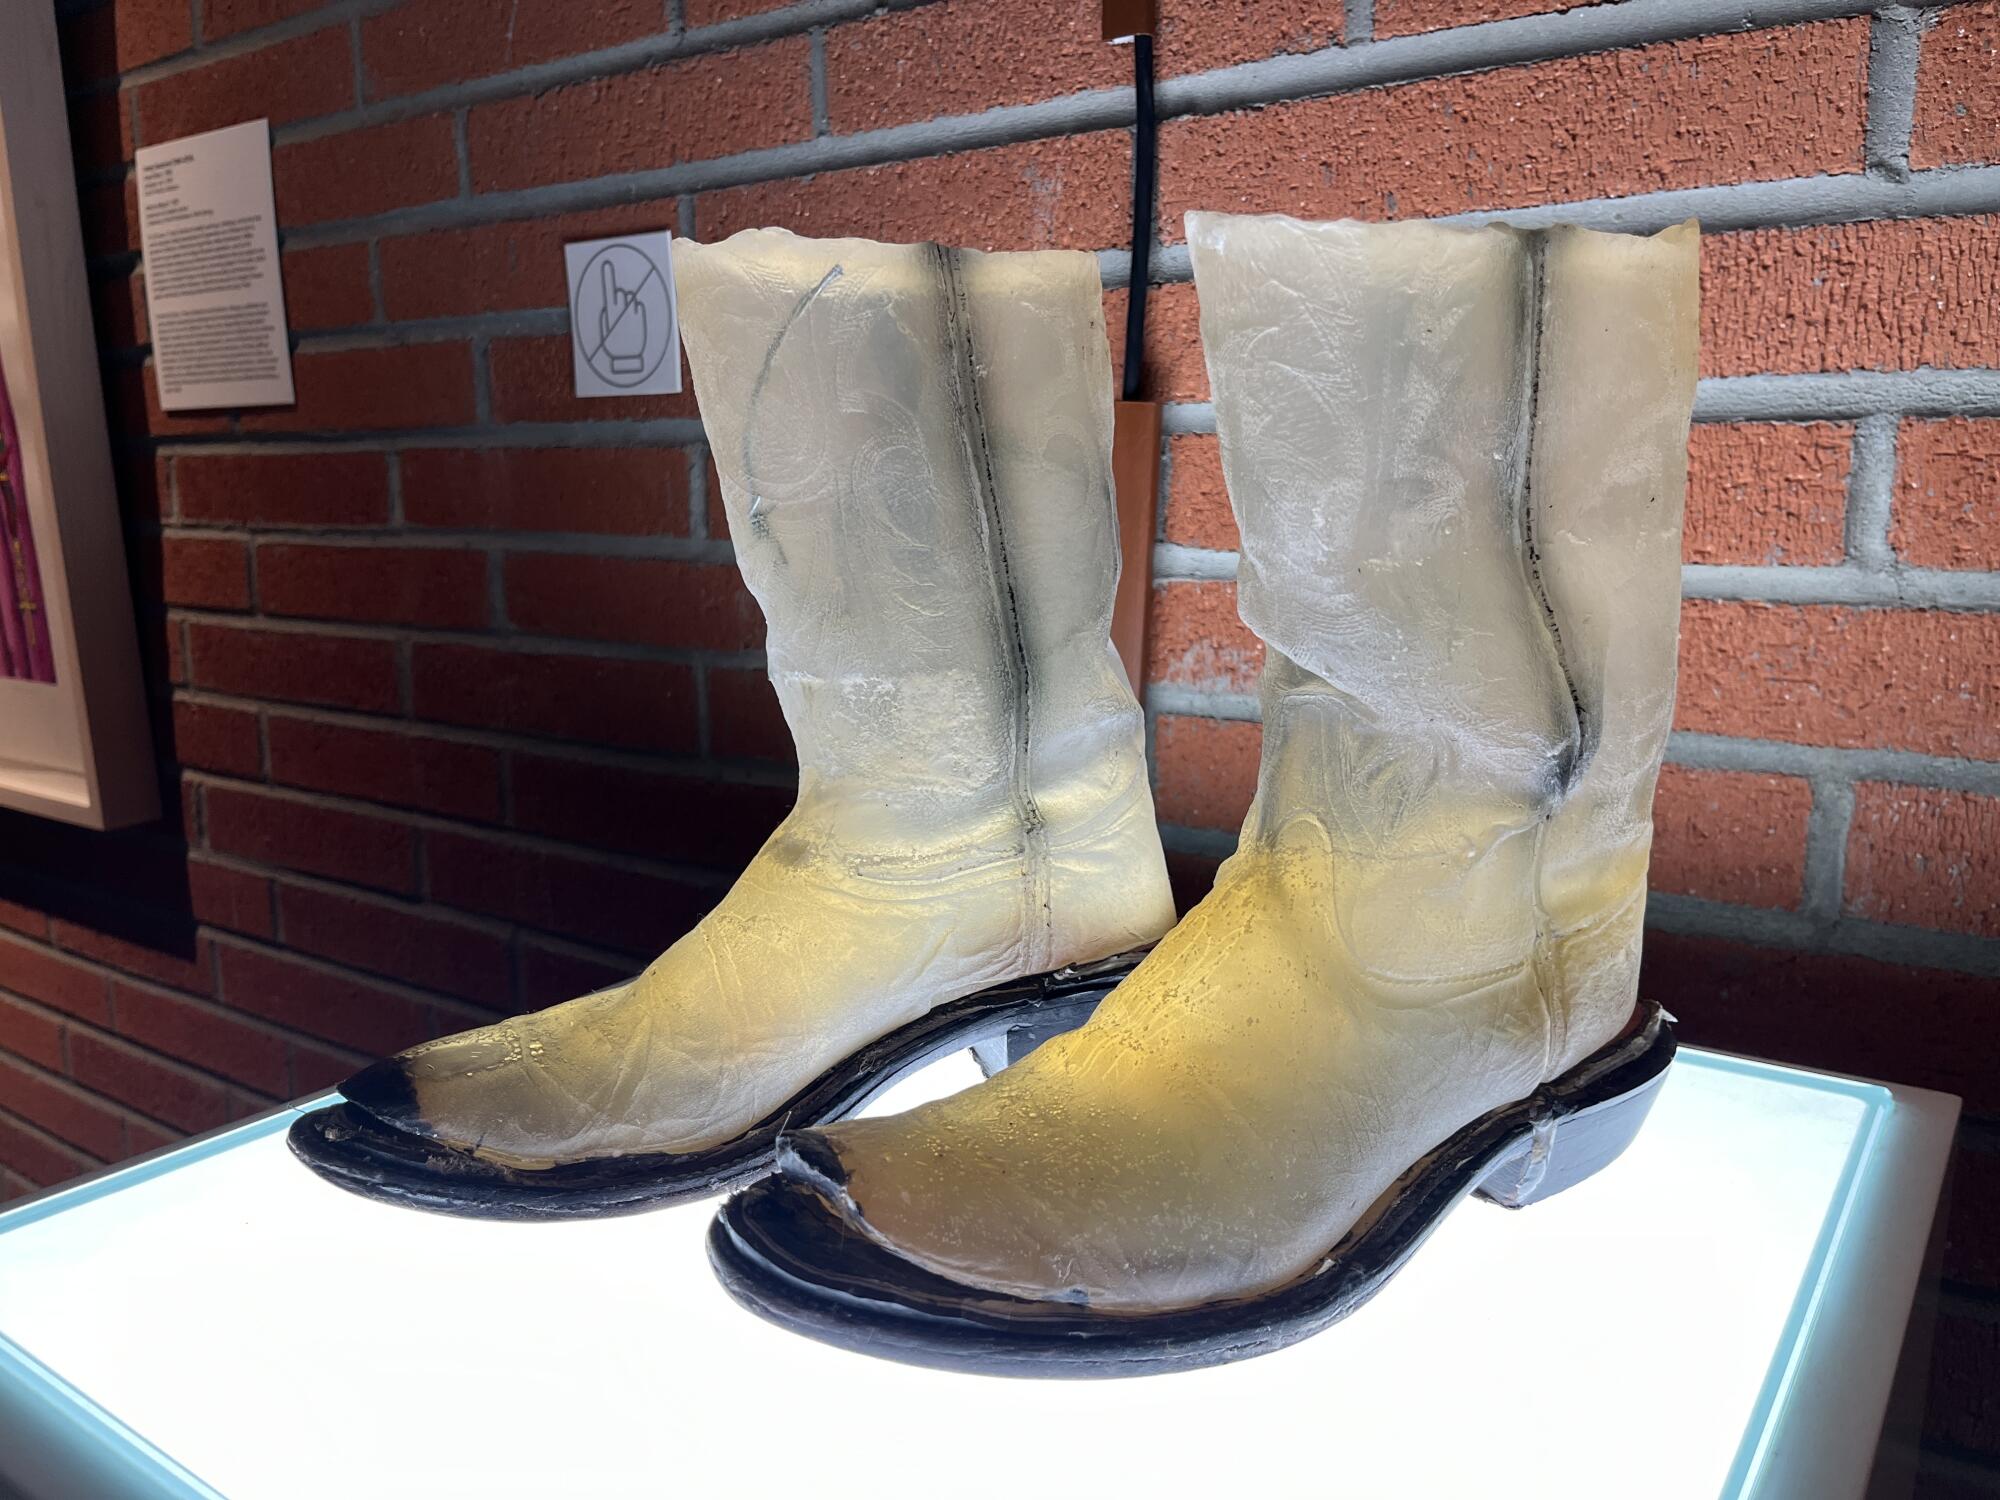 A pair of translucent boots made out of melted soaps stand atop an illuminated plinth.